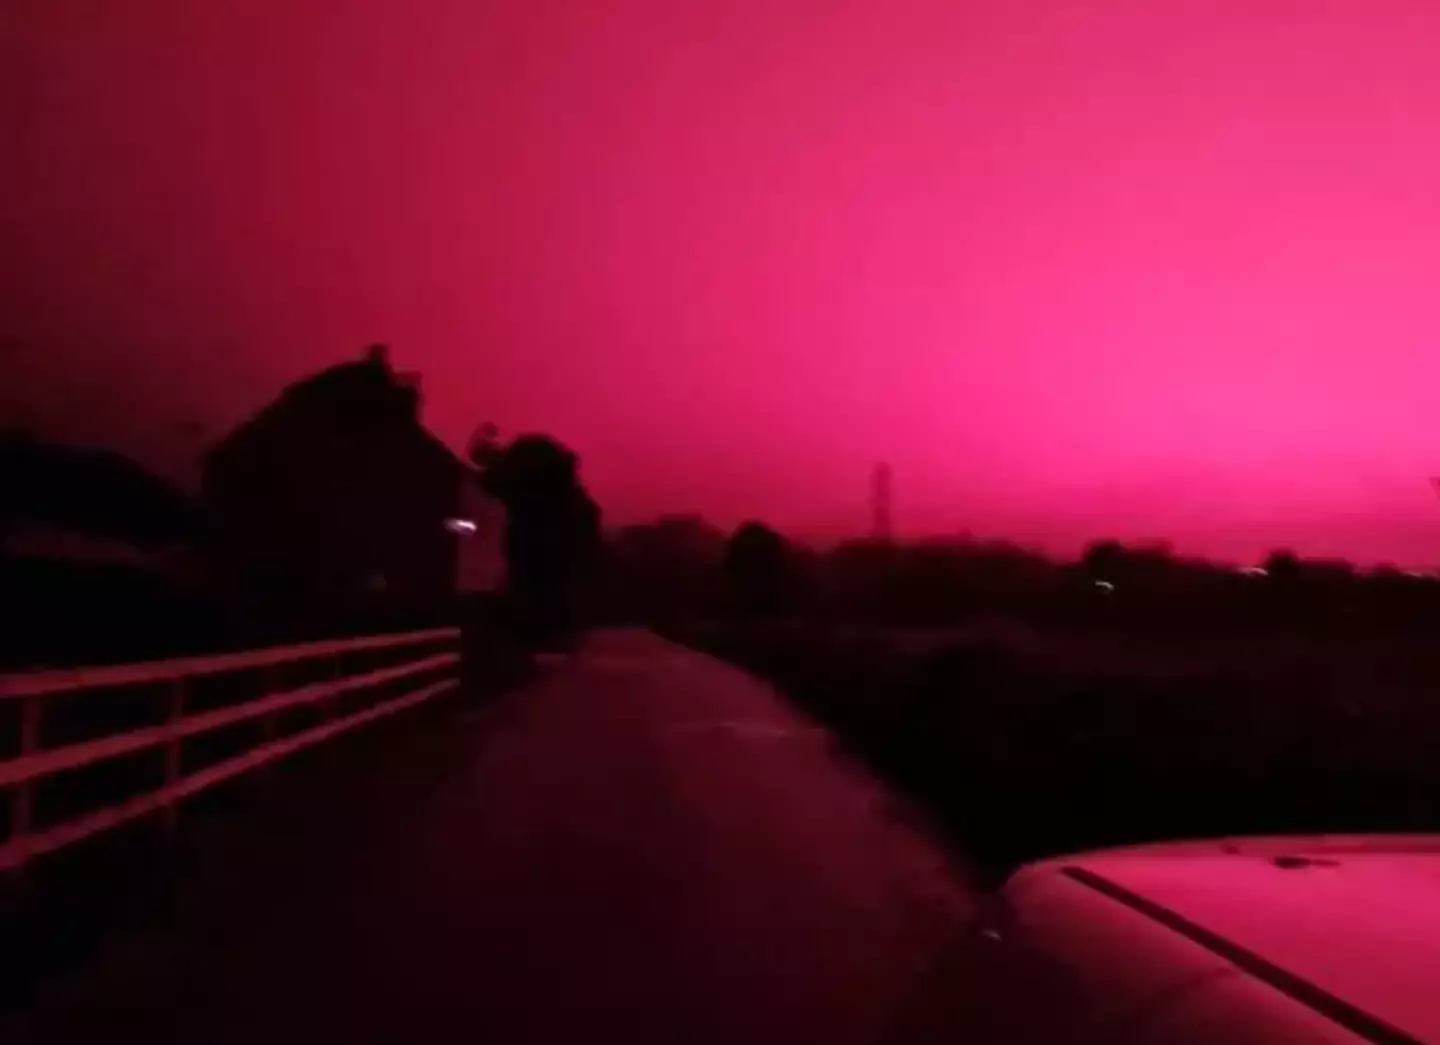 The sky turned a glowing pink colour.